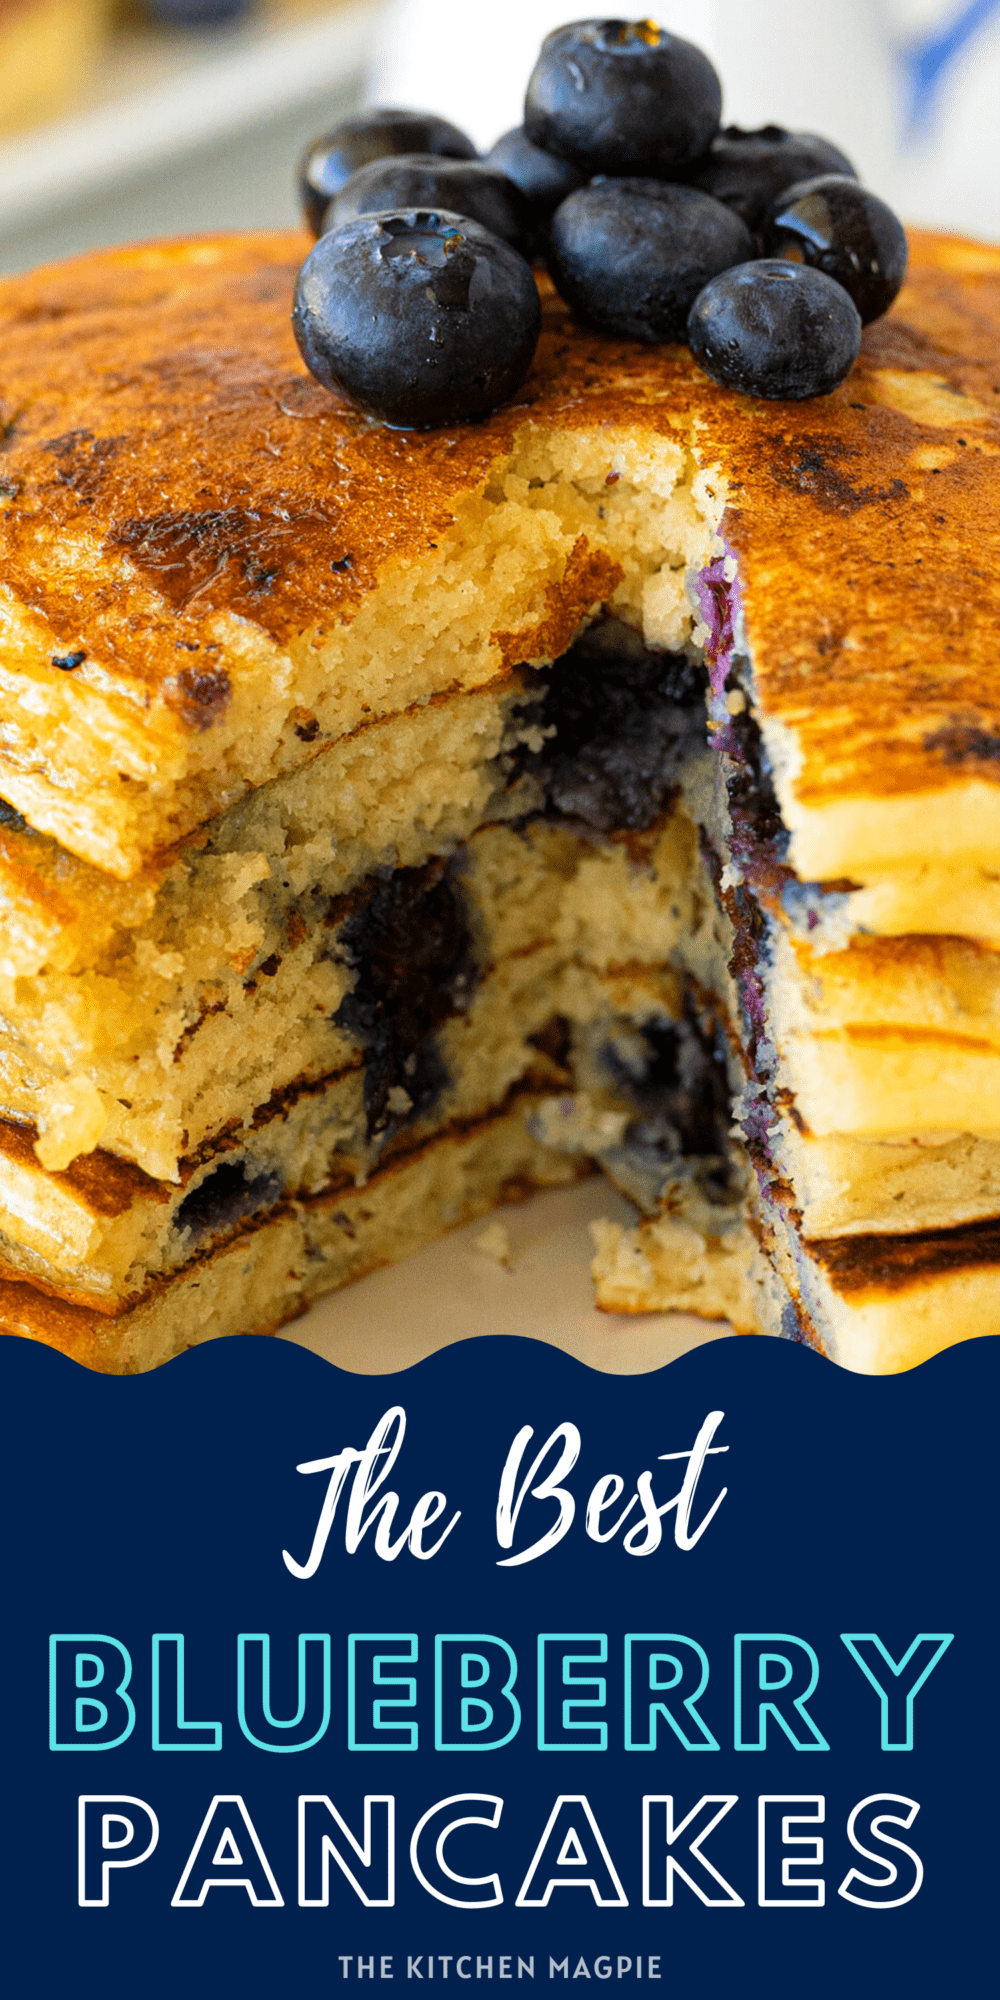 Decadently rich, fluffy homemade blueberry pancakes with a secret ingredient are a perfect start to your weekend morning.